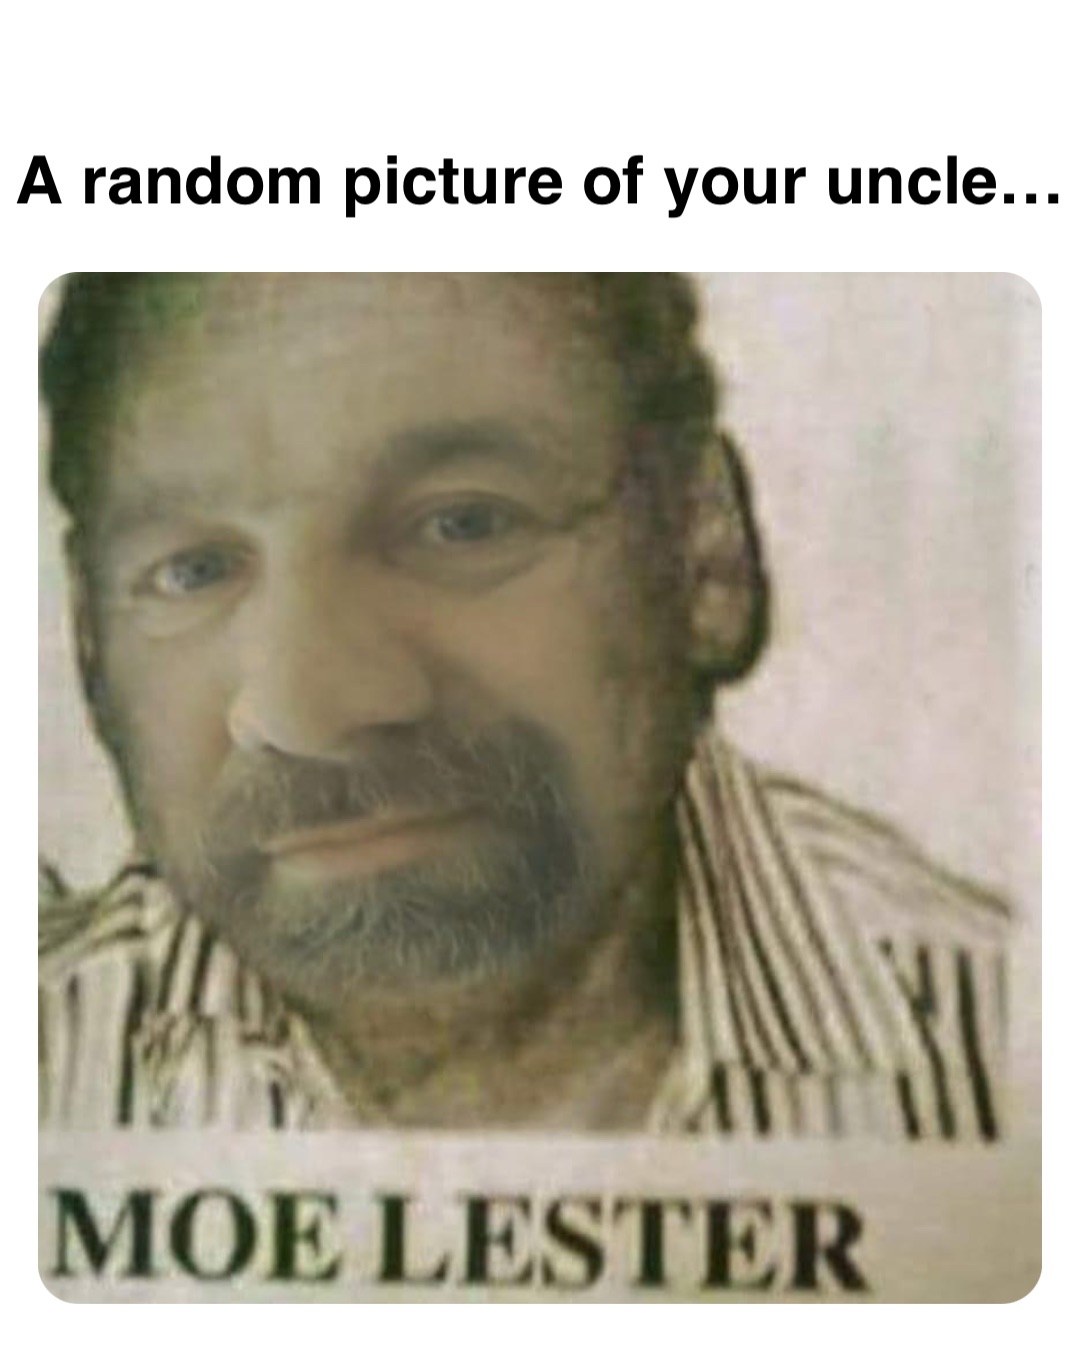 Double tap to edit A random picture of your uncle…